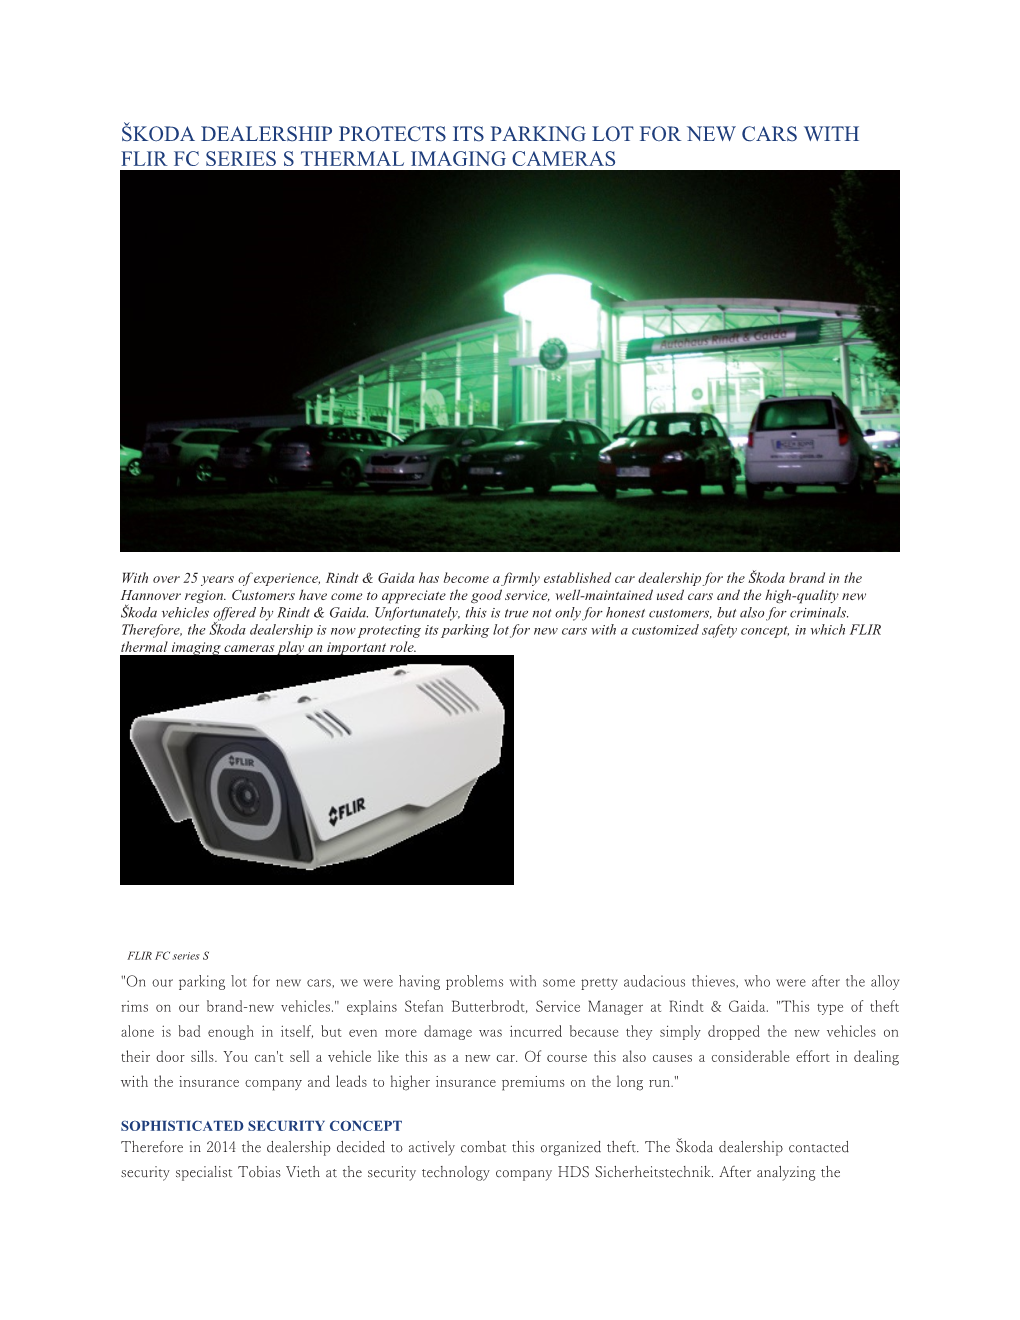 Škoda Dealership Protects Its Parking Lot for New Cars with Flir Fc Series S Thermal Imaging